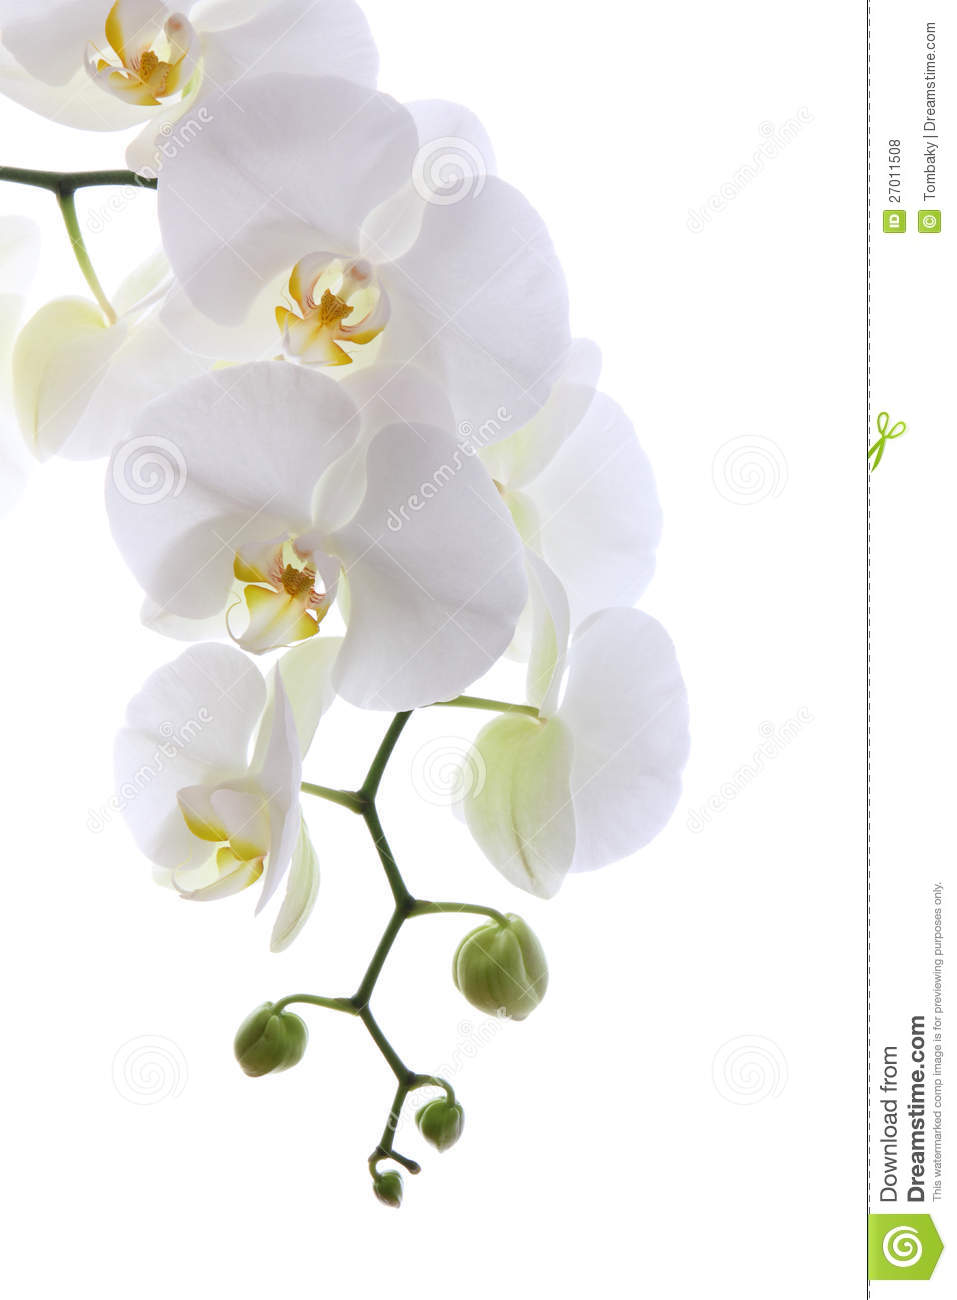 White orchid clipart - Clipground